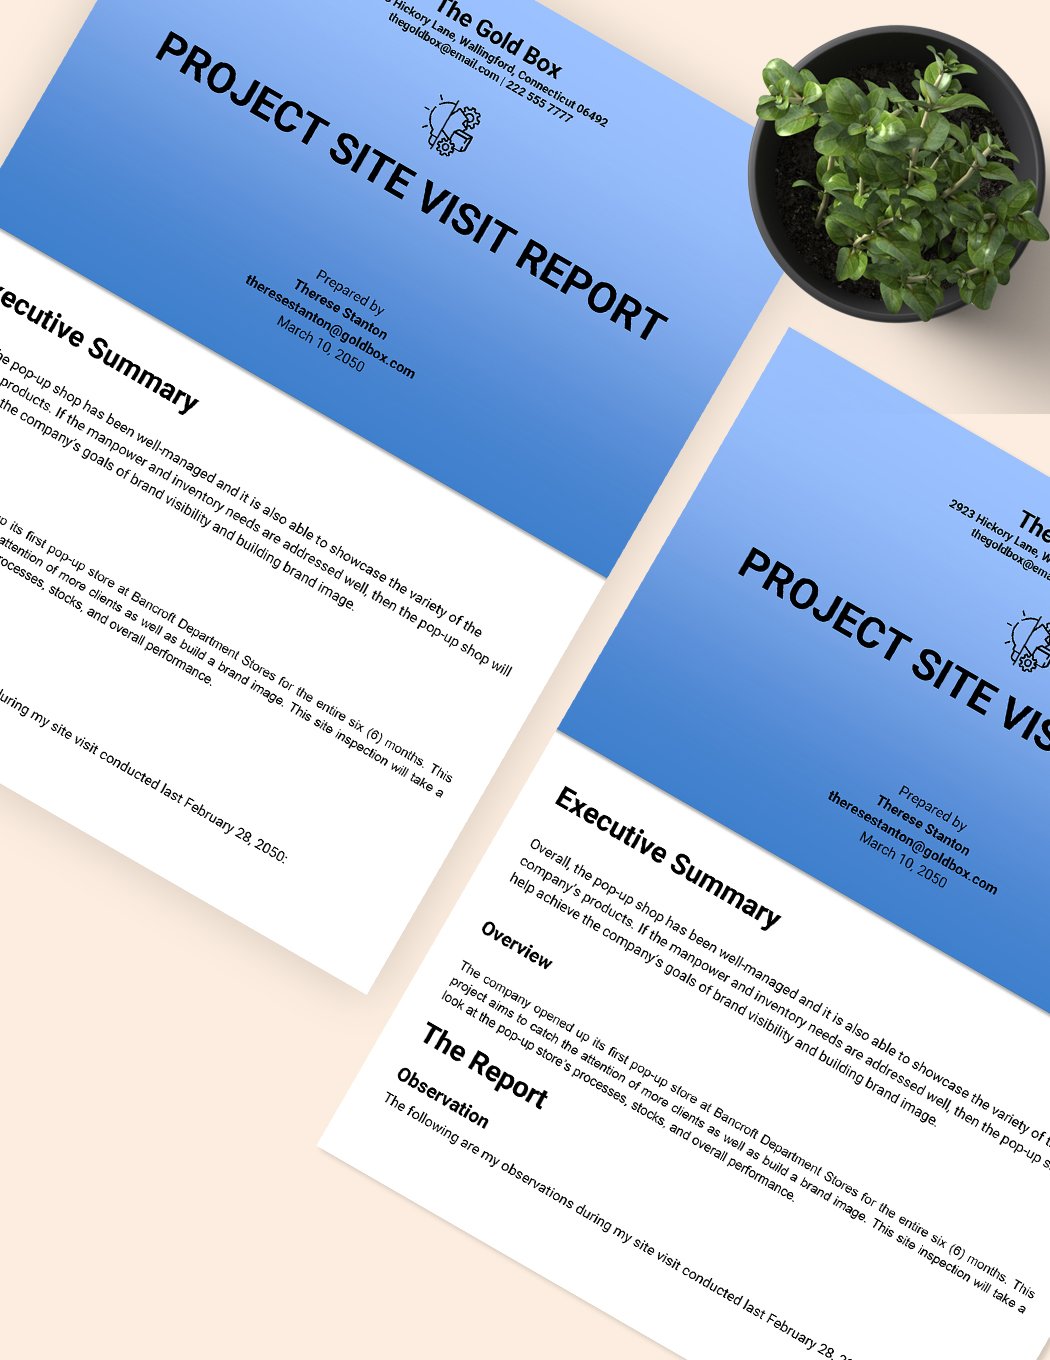 Project Site Visit Report Template